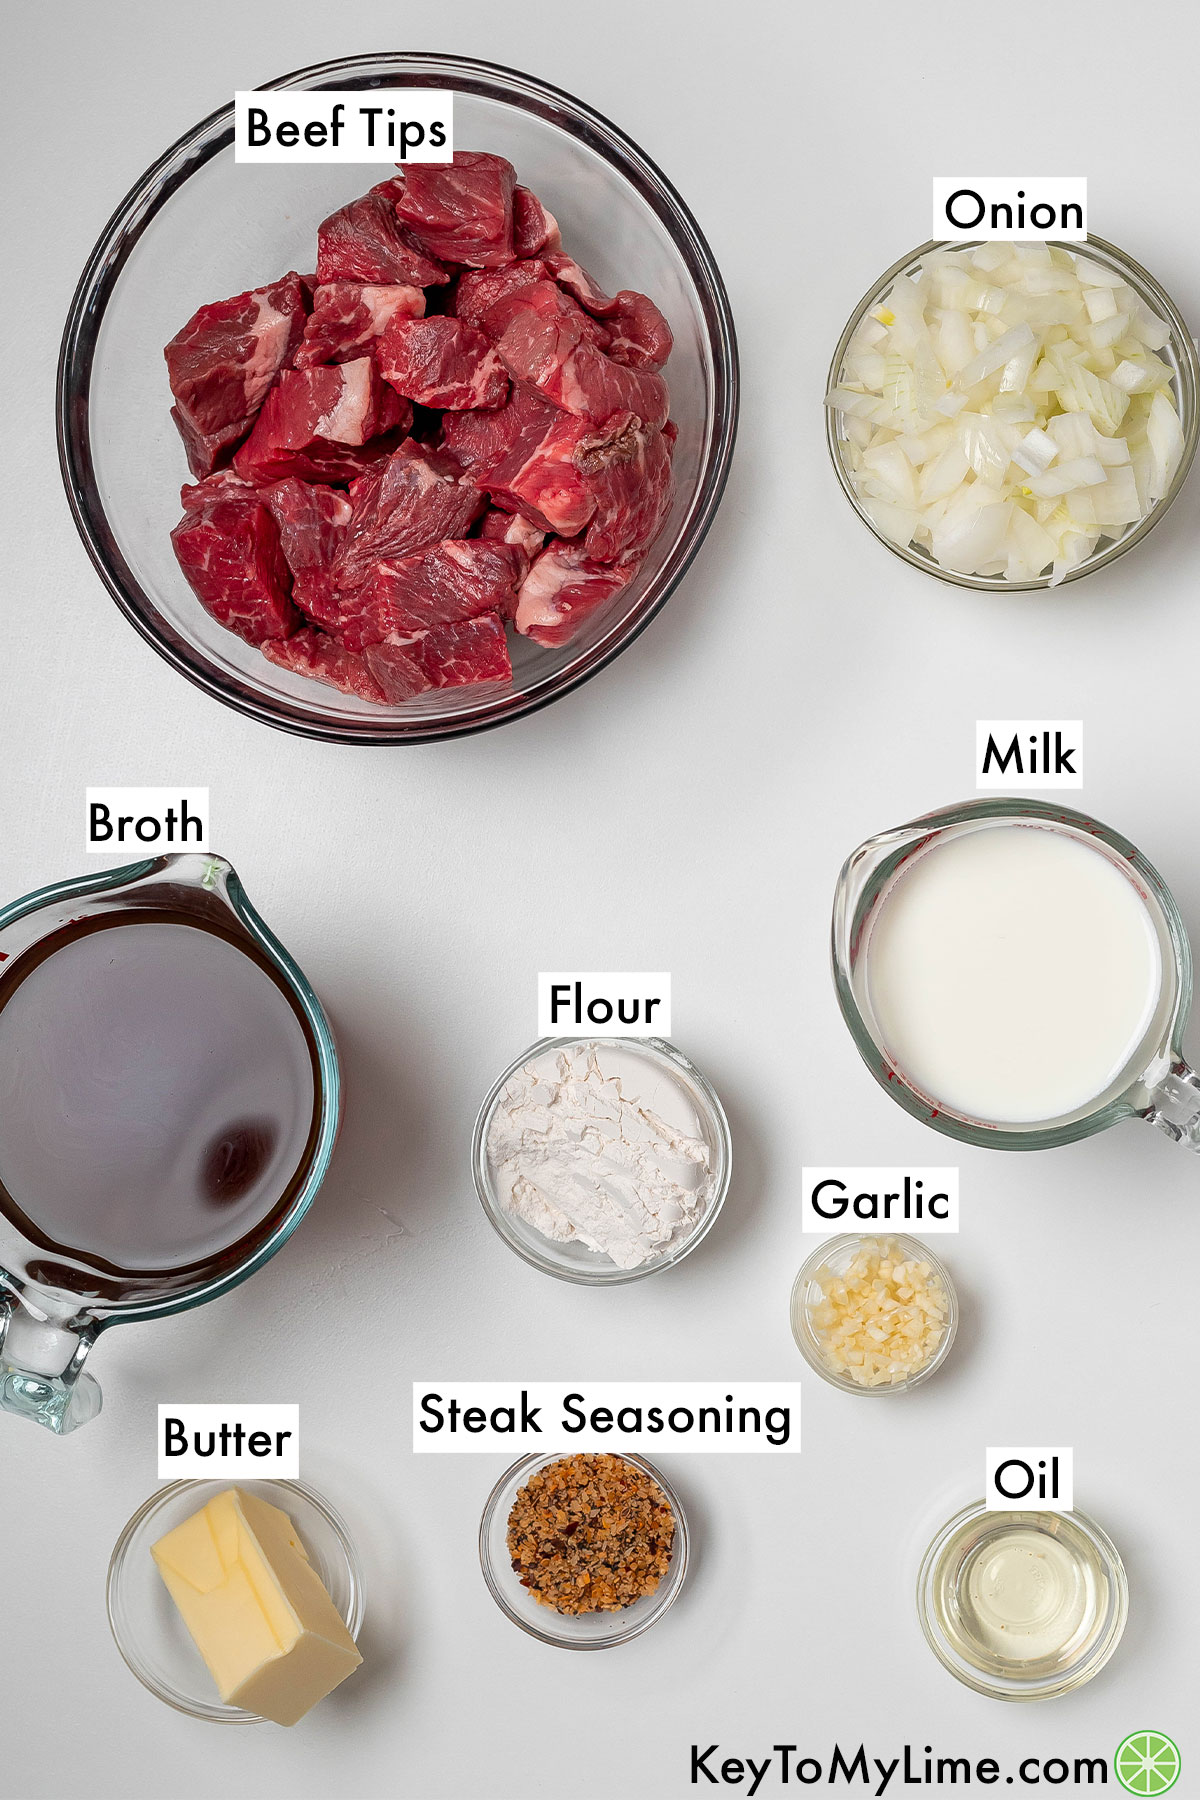 The labeled ingredients for crockpot beef tips.